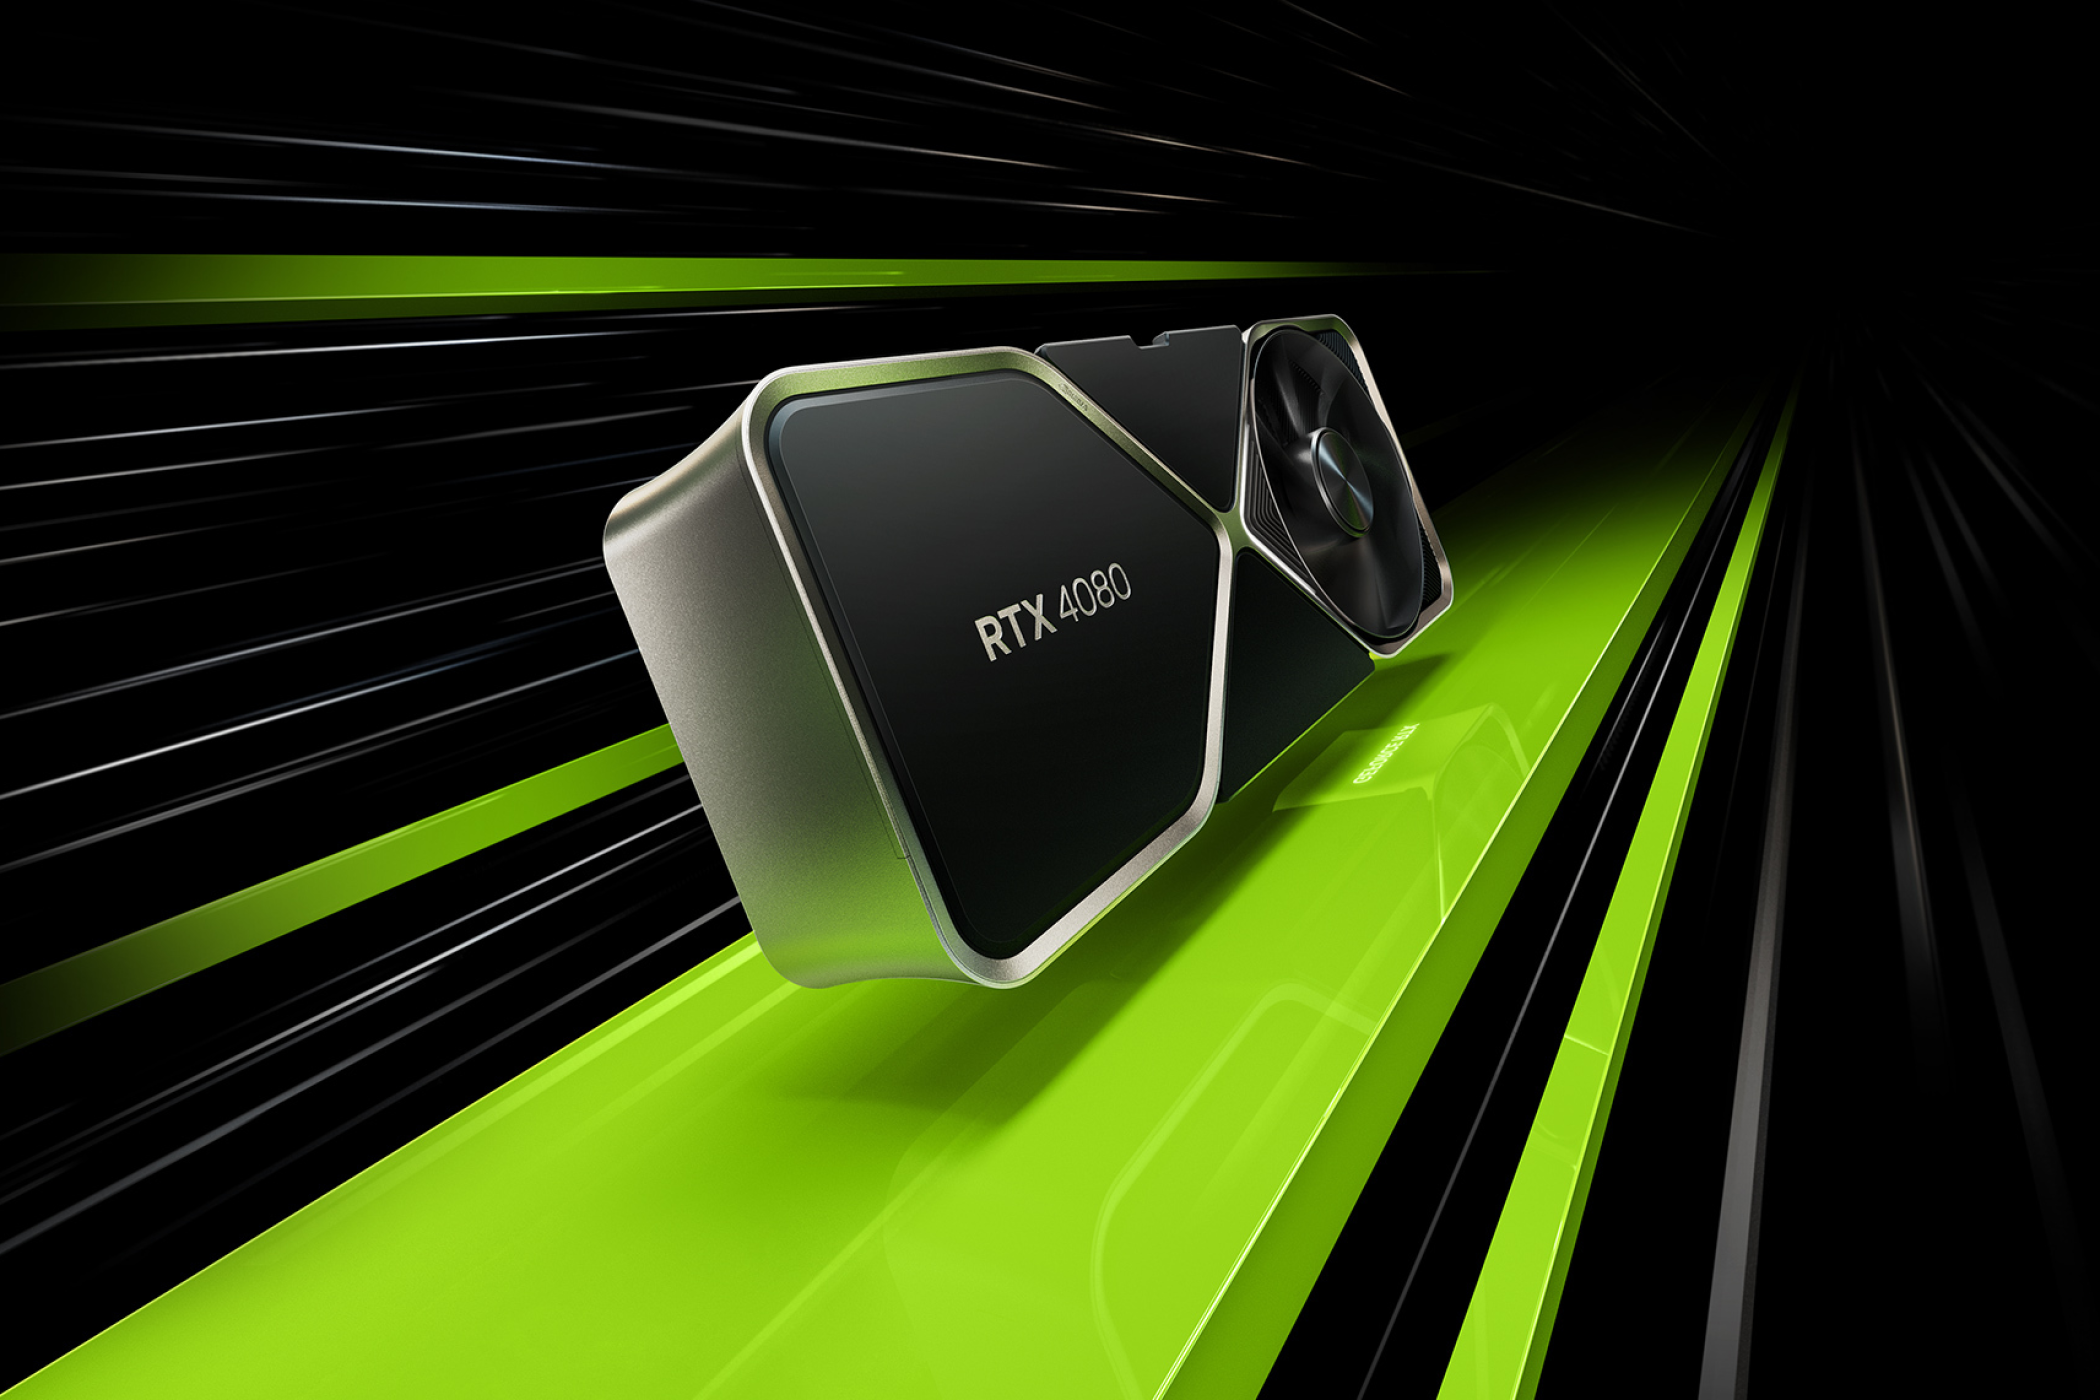 Nvidia GeForce RTX GPUs can now make online videos look better with Video Super Resolution